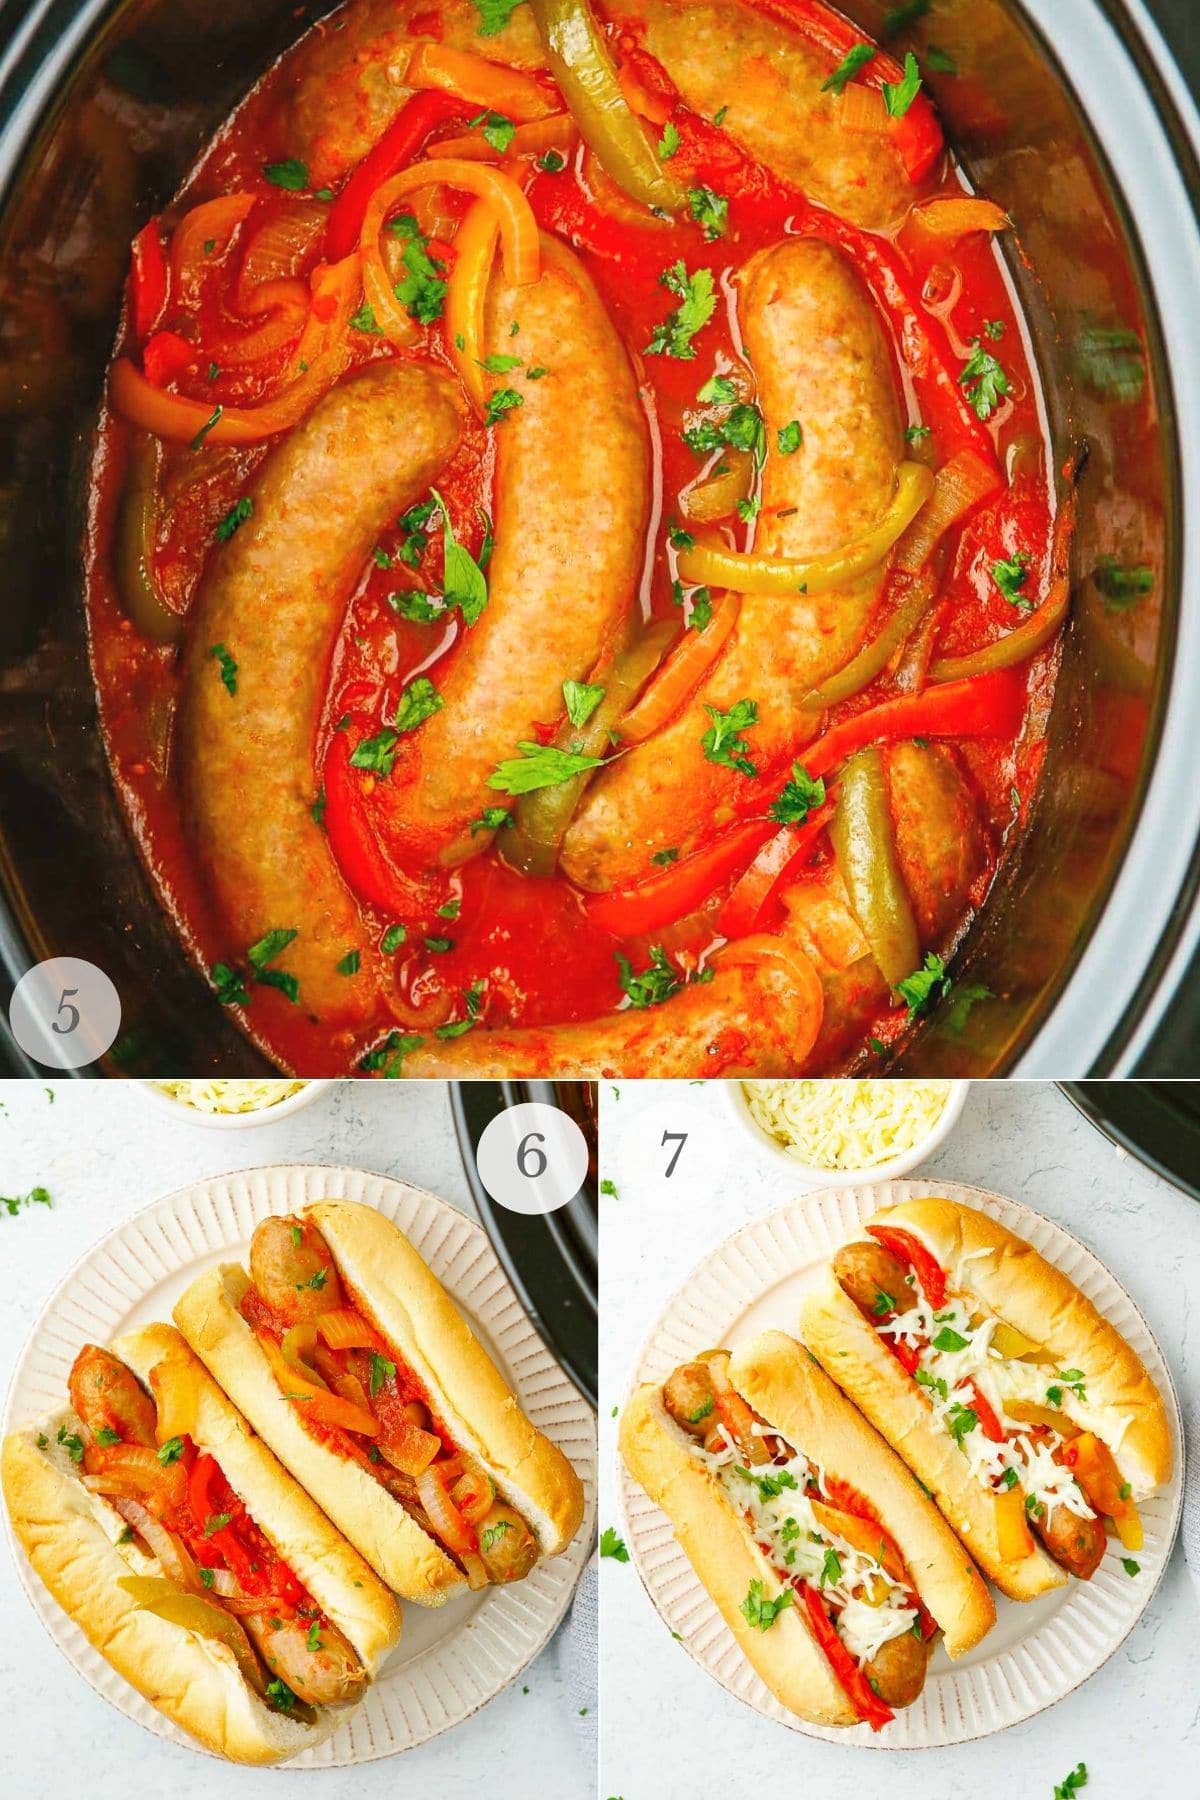 sausage and peppers recipes steps 5-7